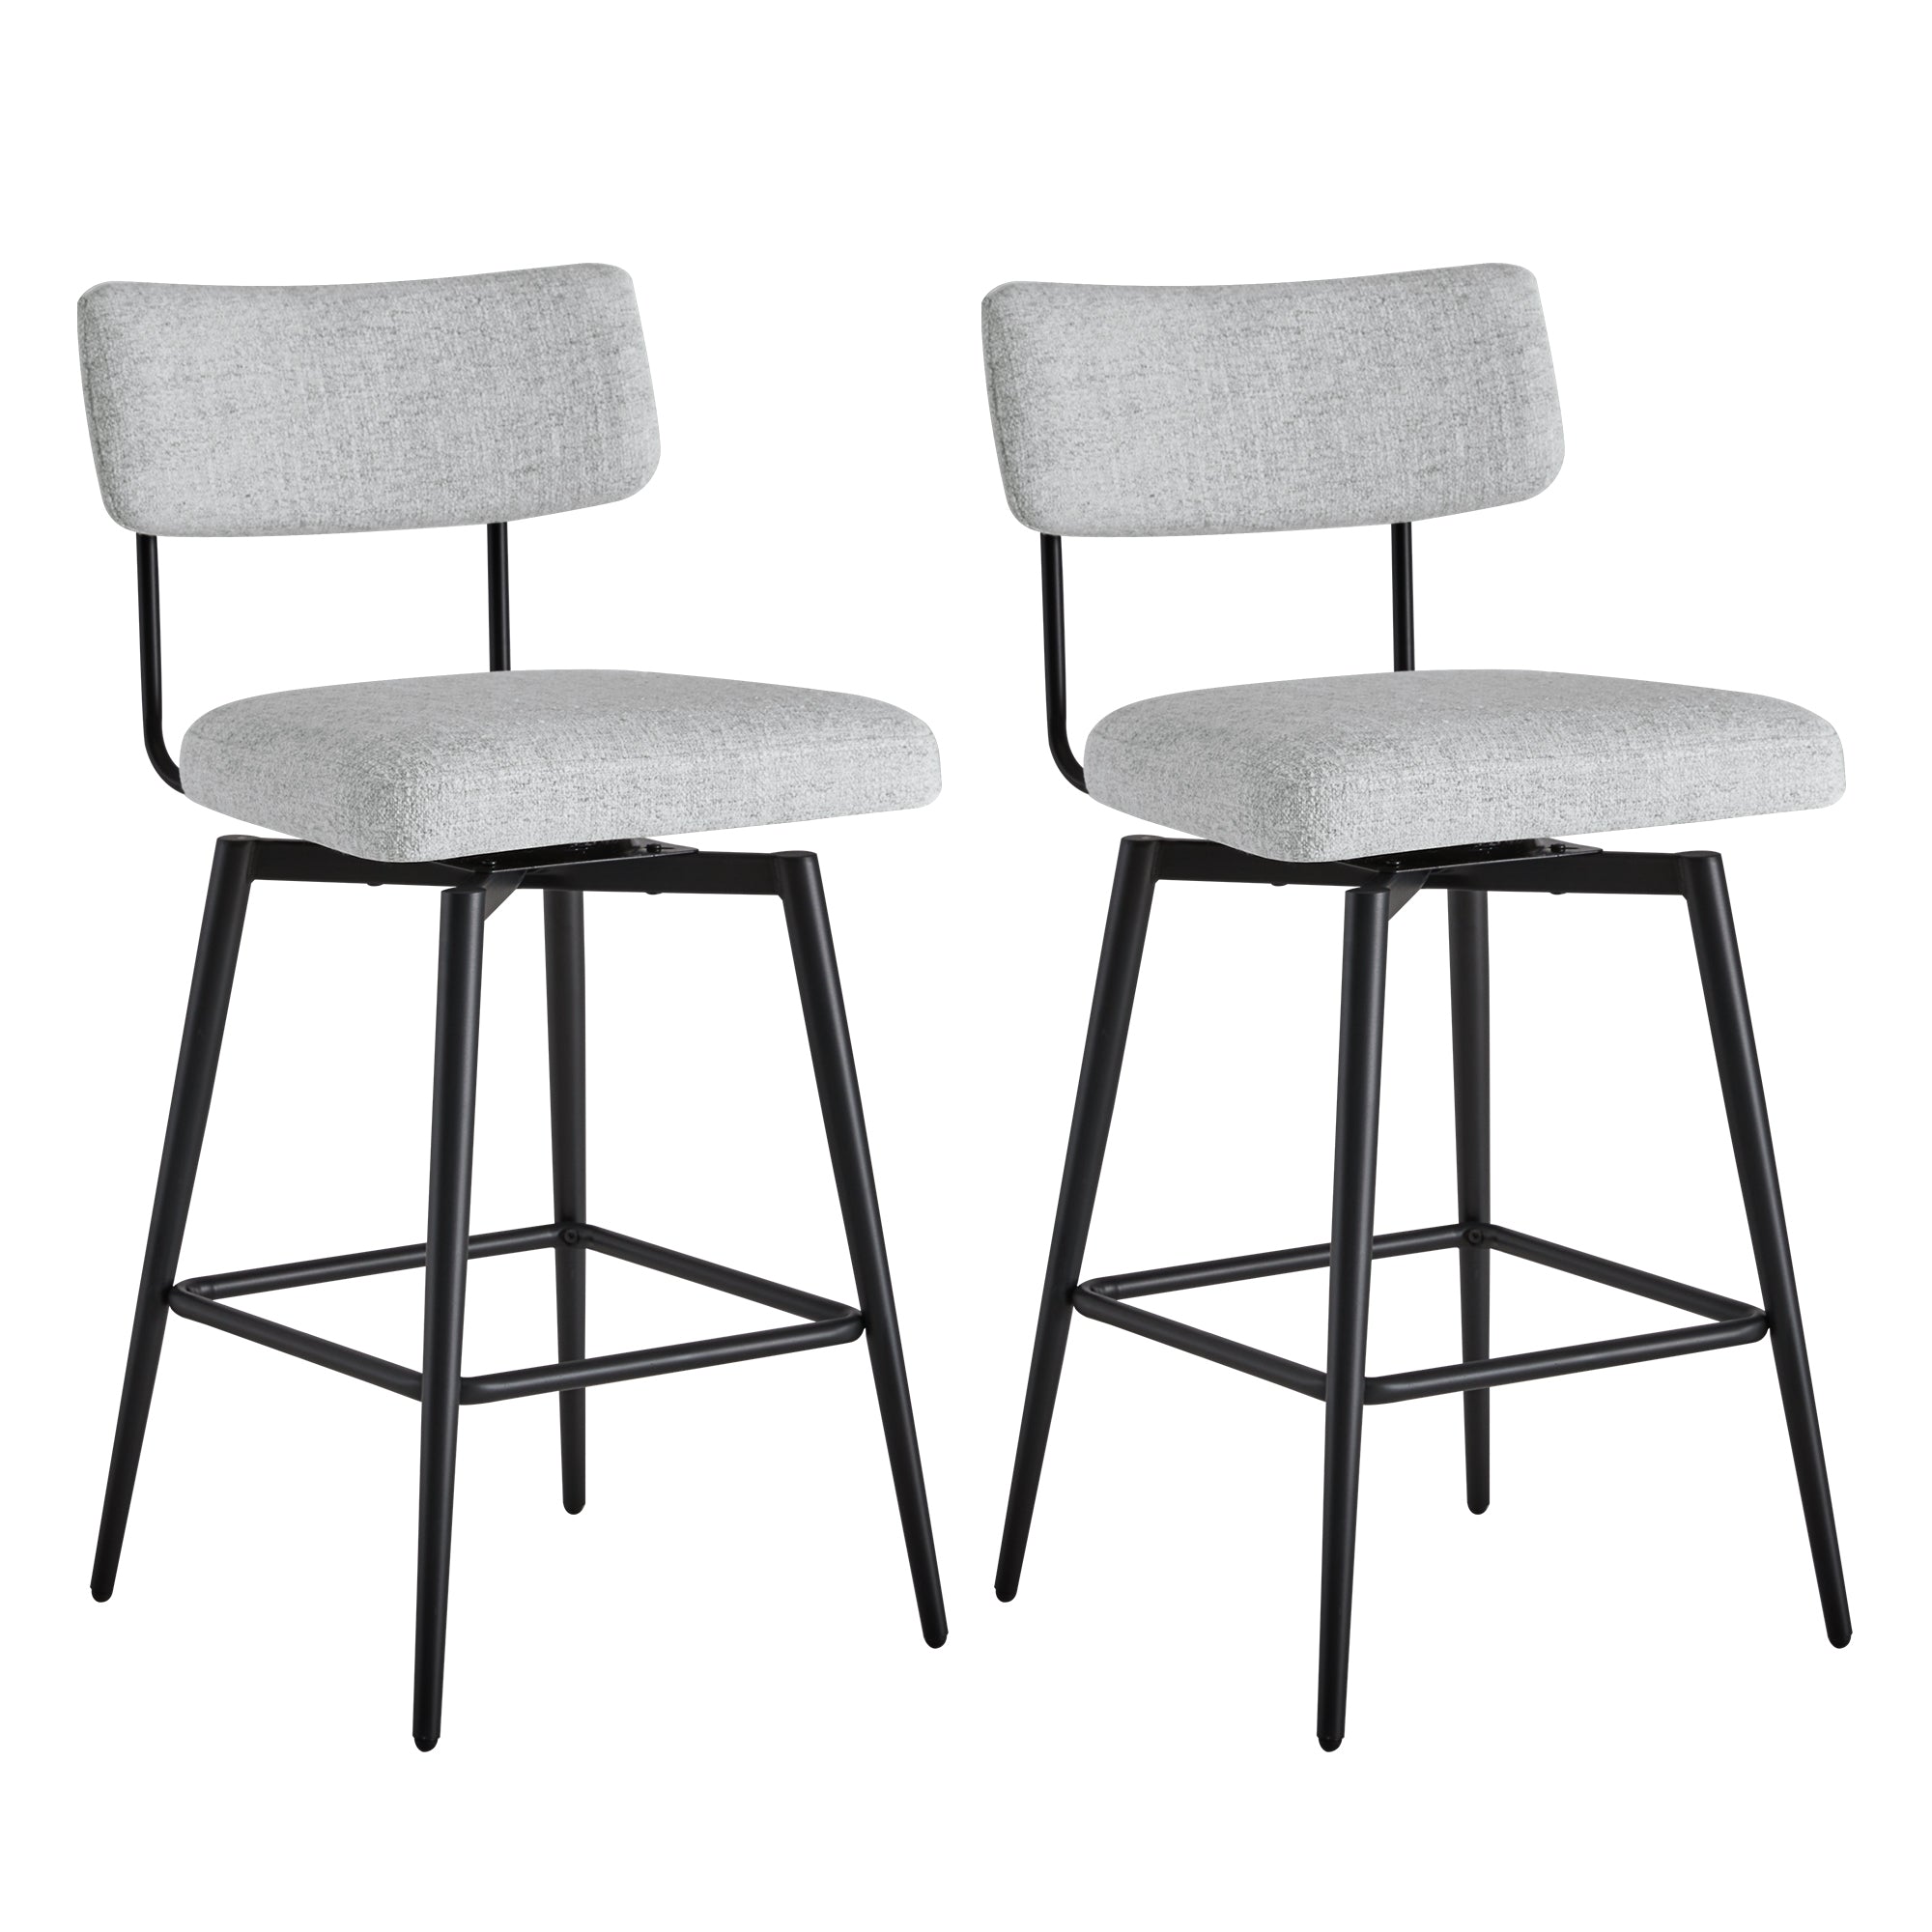 CHITA LIVING-Lovy Swivel Counter Stools (Set of 2）-Counter Stools-Fabric-White (Multi-colored)-